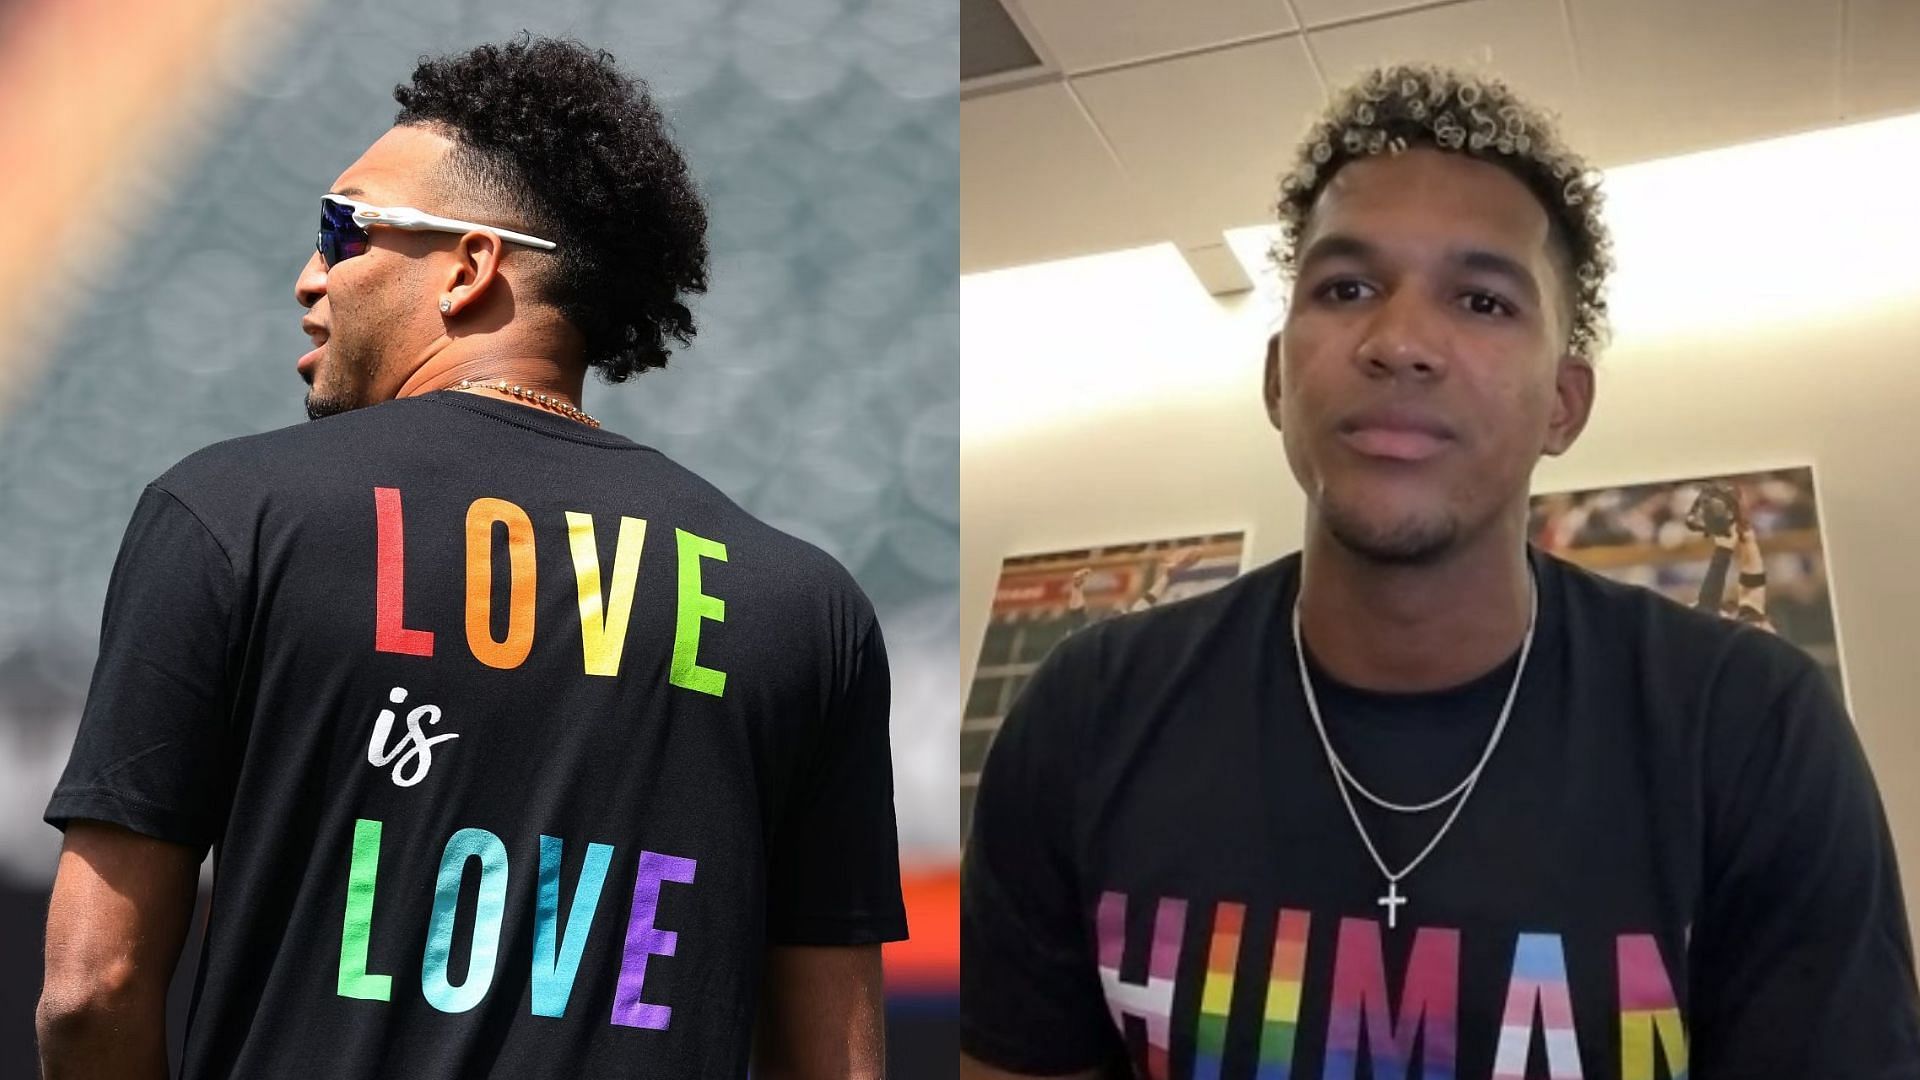 The MLB and their players have celebrated Pride Night, celebrating the LGBTQ community